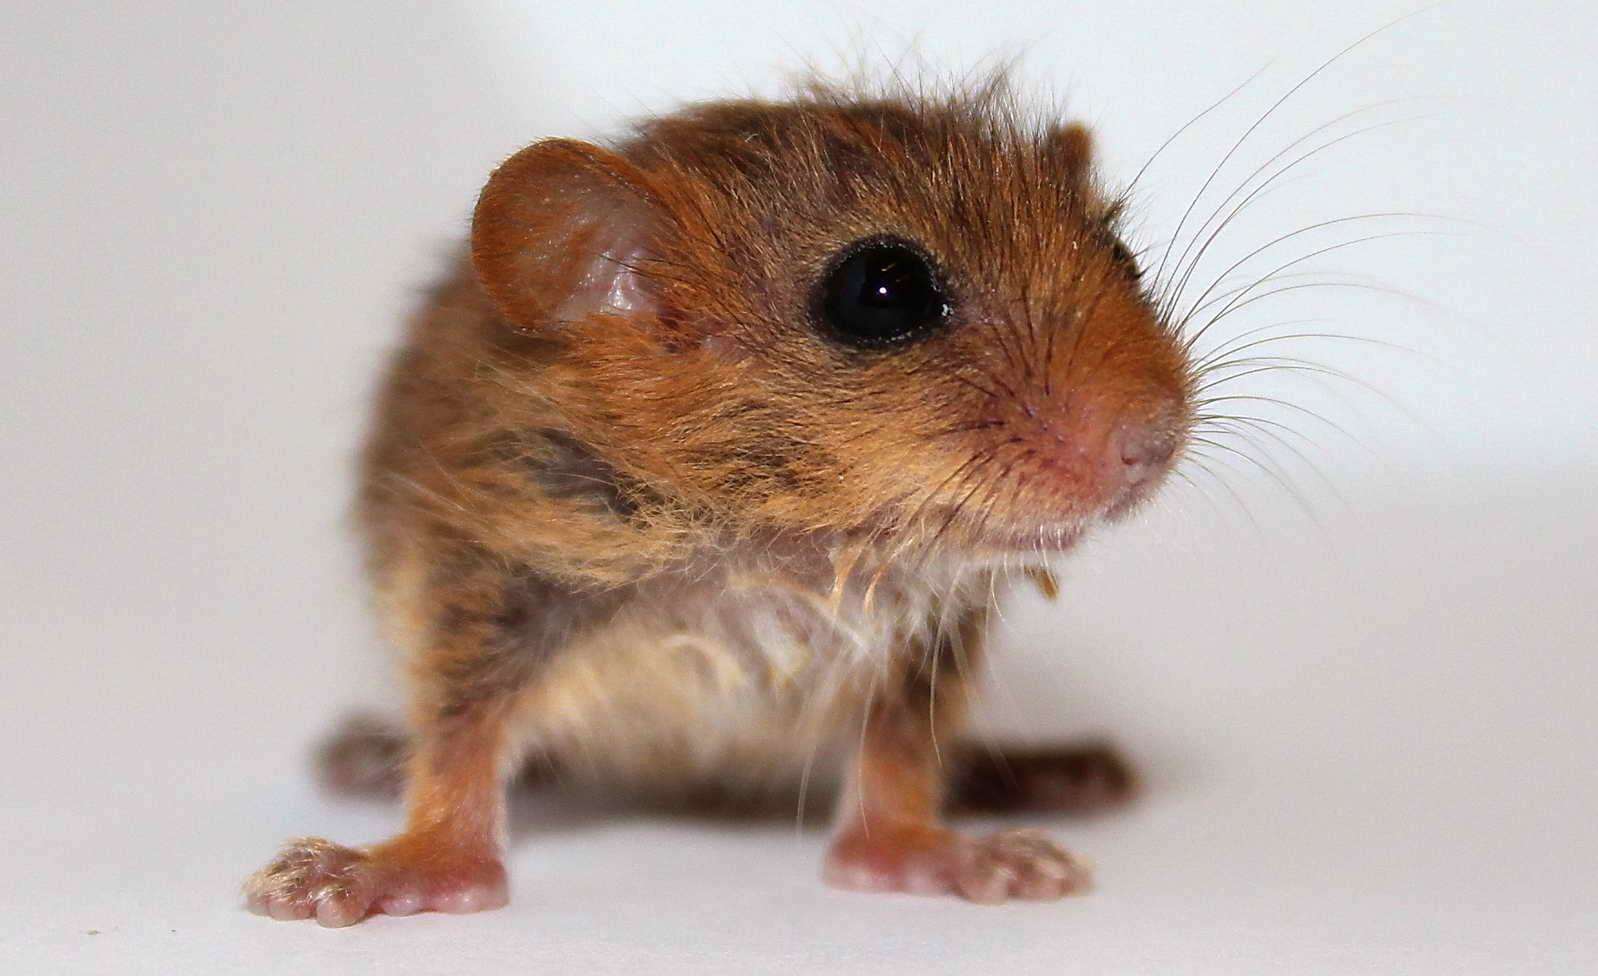 The Wildwood Trust raised 29 or the 39 dormice released this year. Picture: The Wildwood Trust